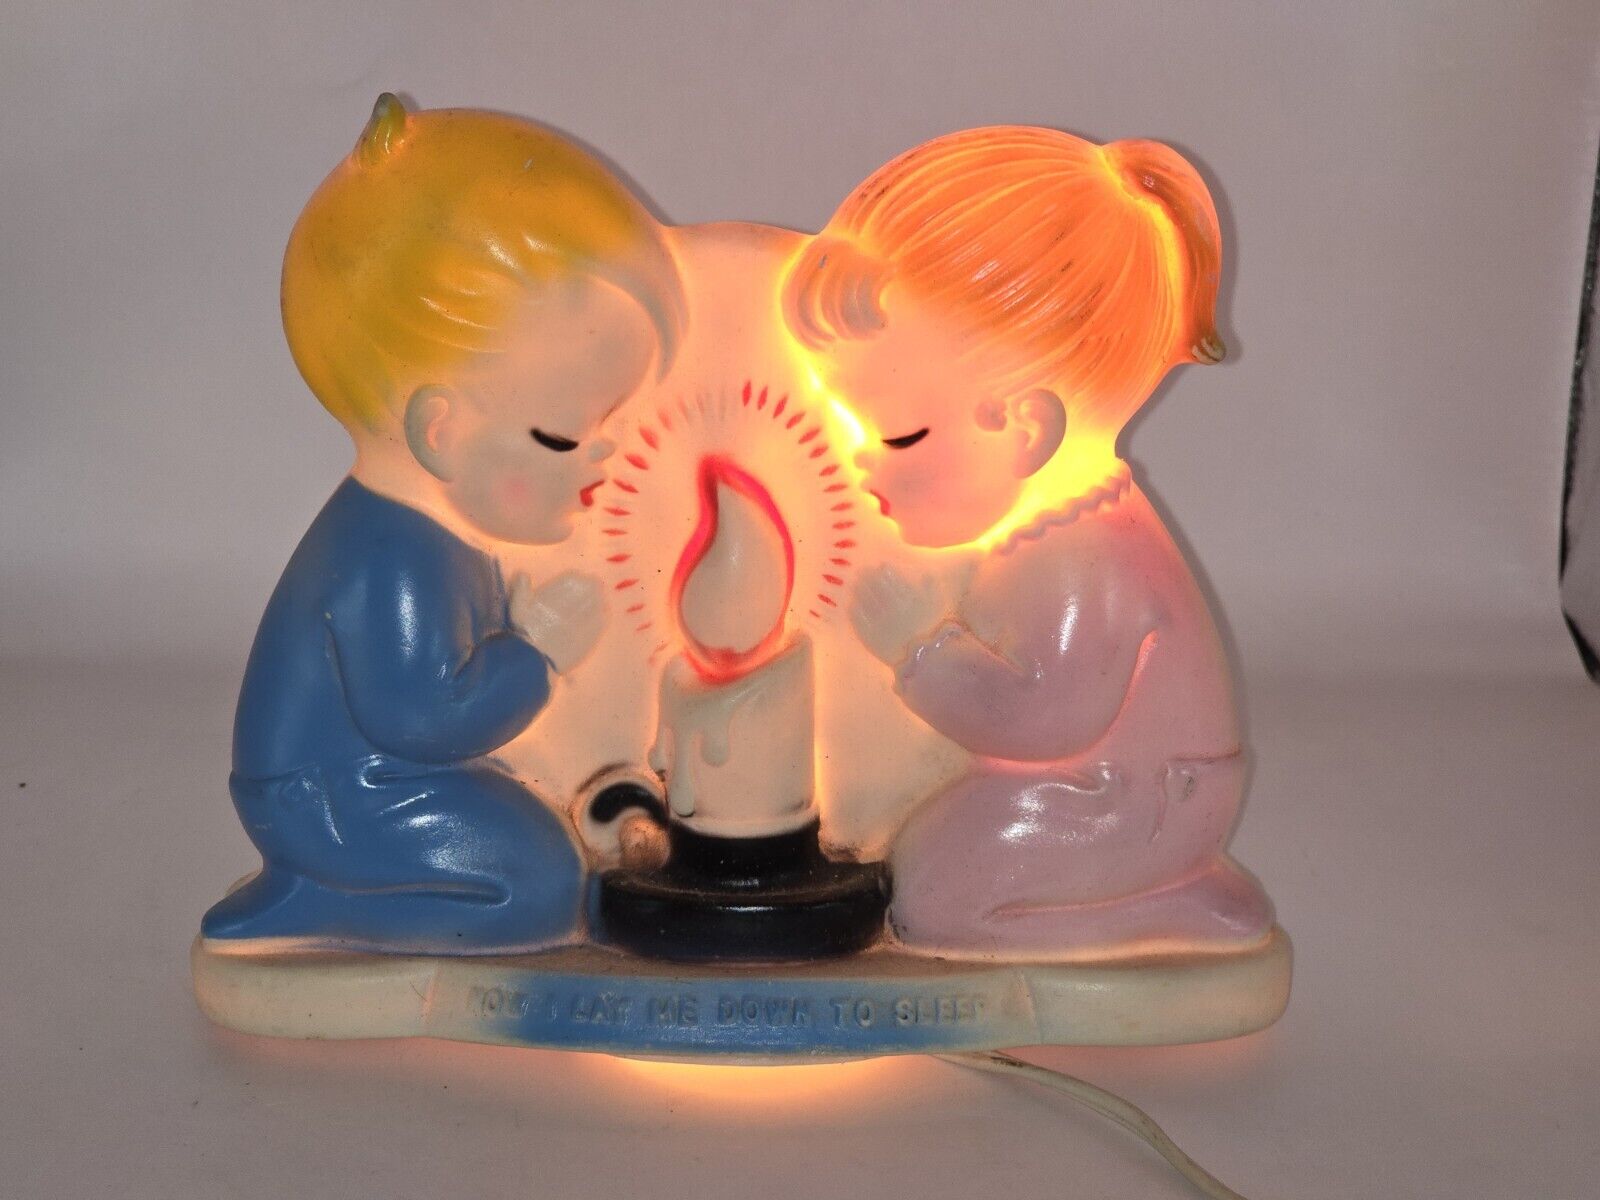 Alan Jay Rubber Night Light Now I Lay Me Down To Sleep Vintage 1960